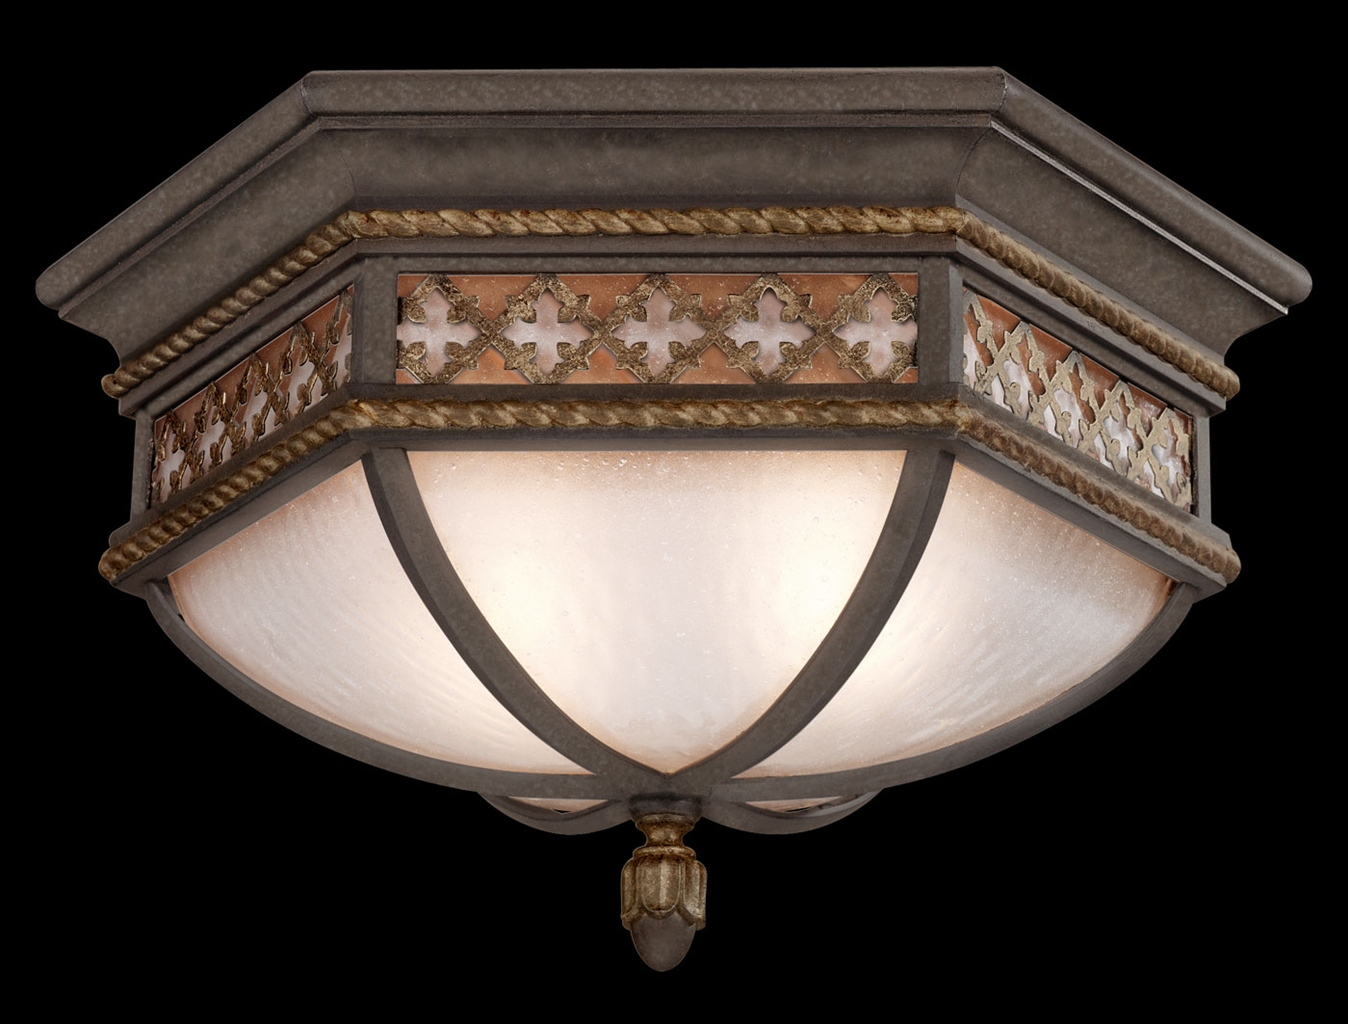 Lighting Large flush mount of solid brass featuring a variegated rich umber patina